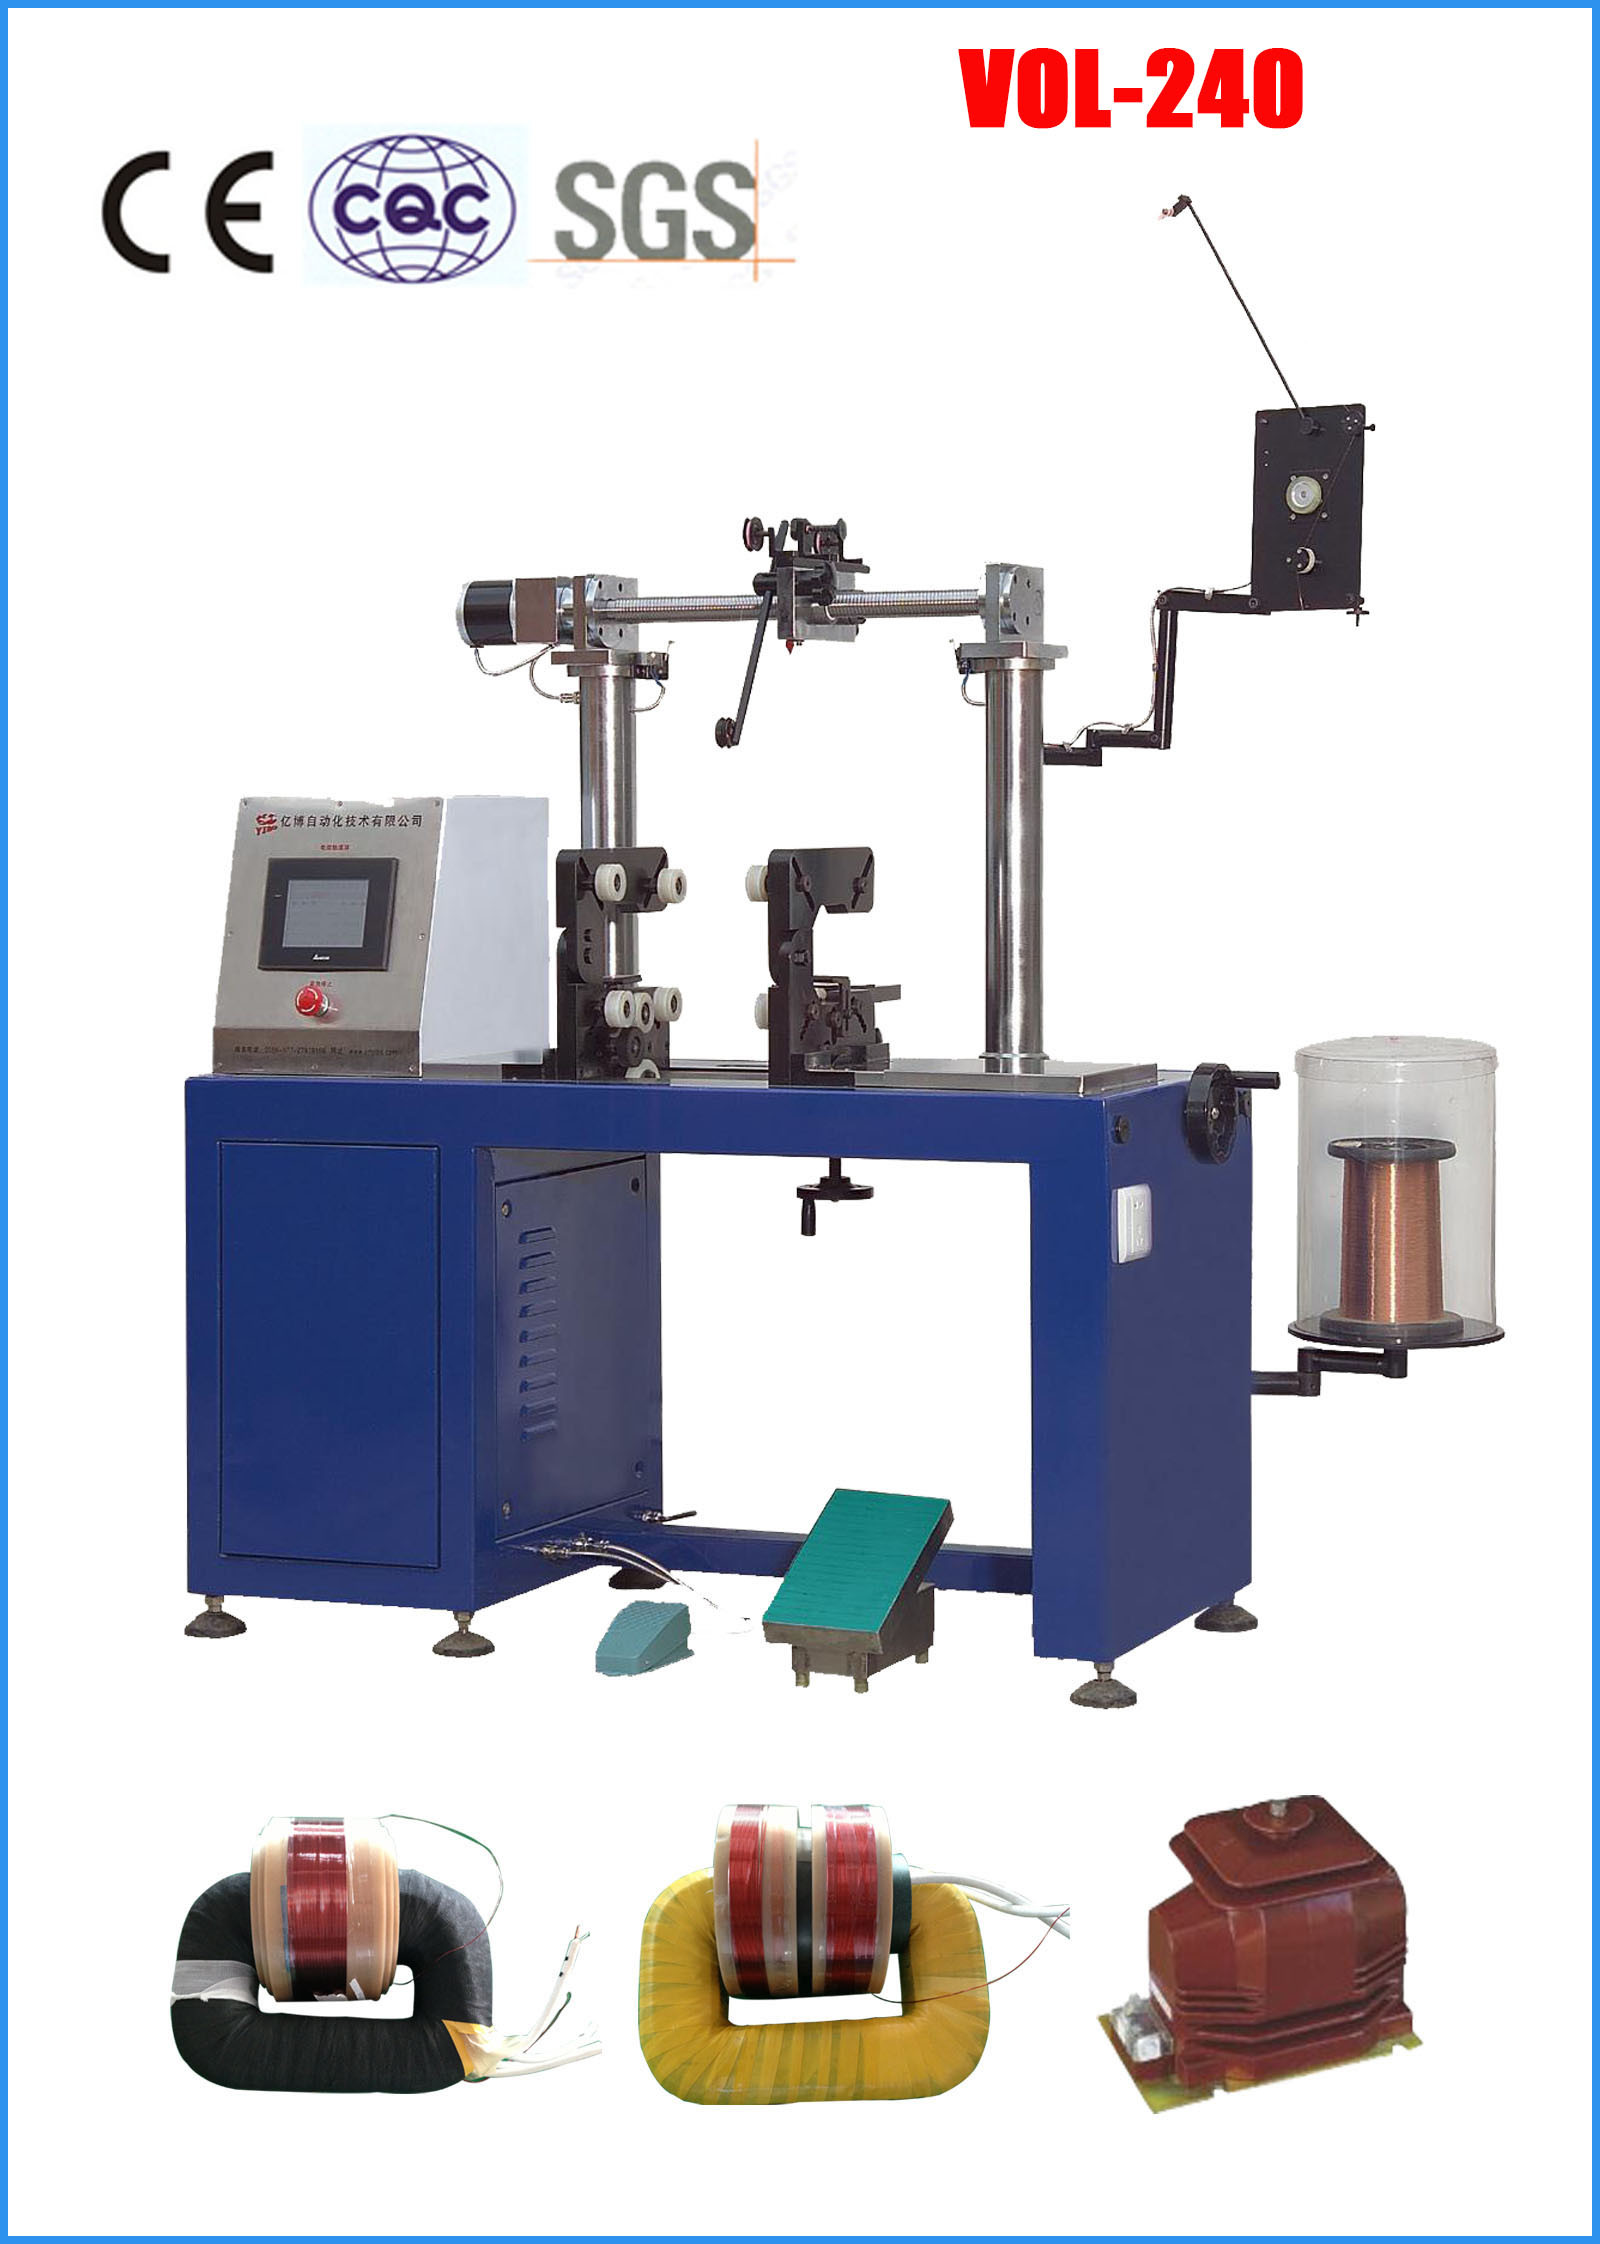  CNC coil winding machine for voltage transformer Manufactures